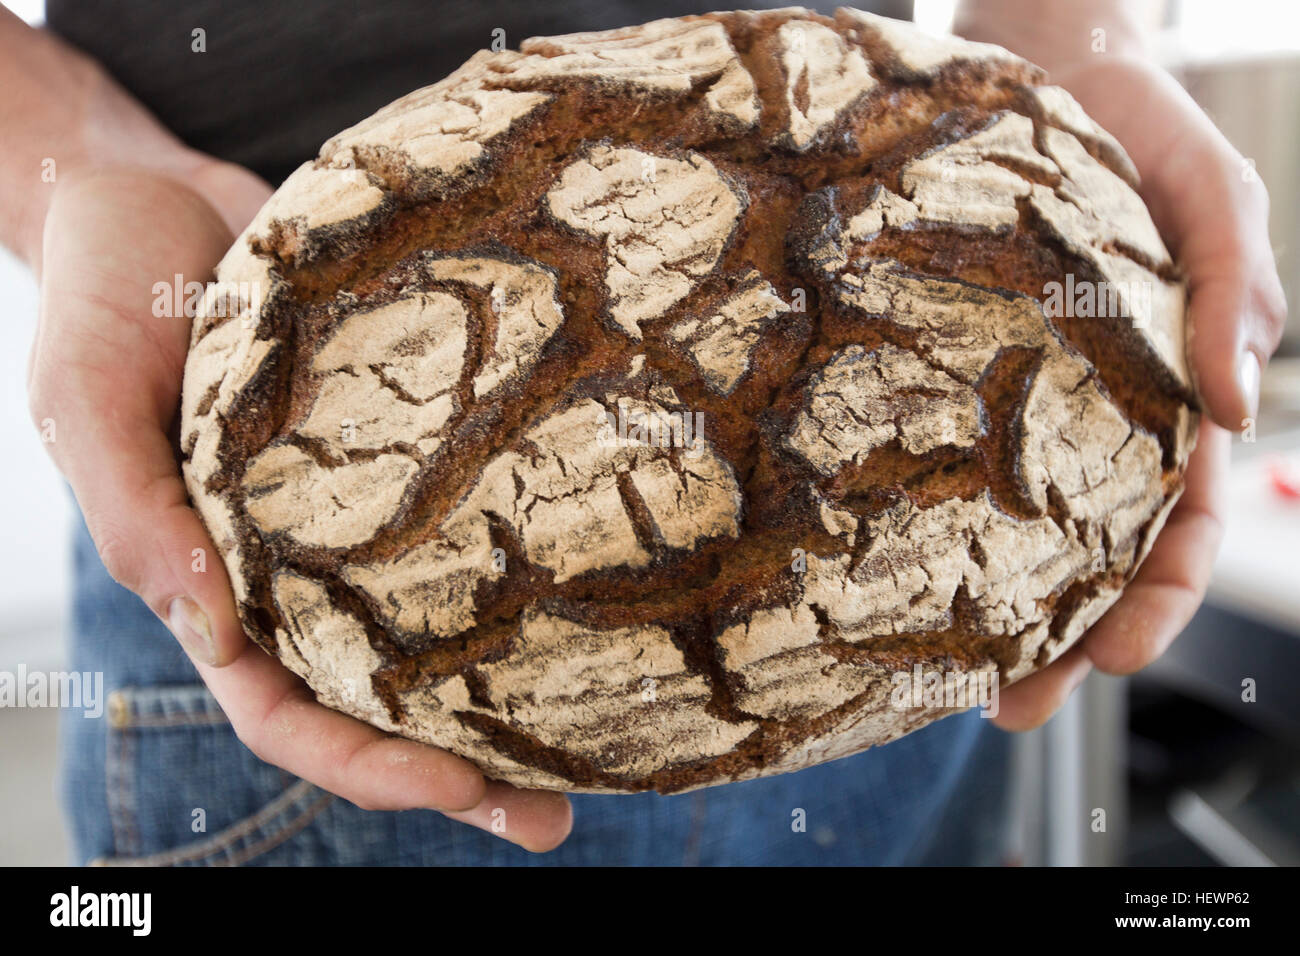 Cropped view of man holding freshly baked bread Stock Photo